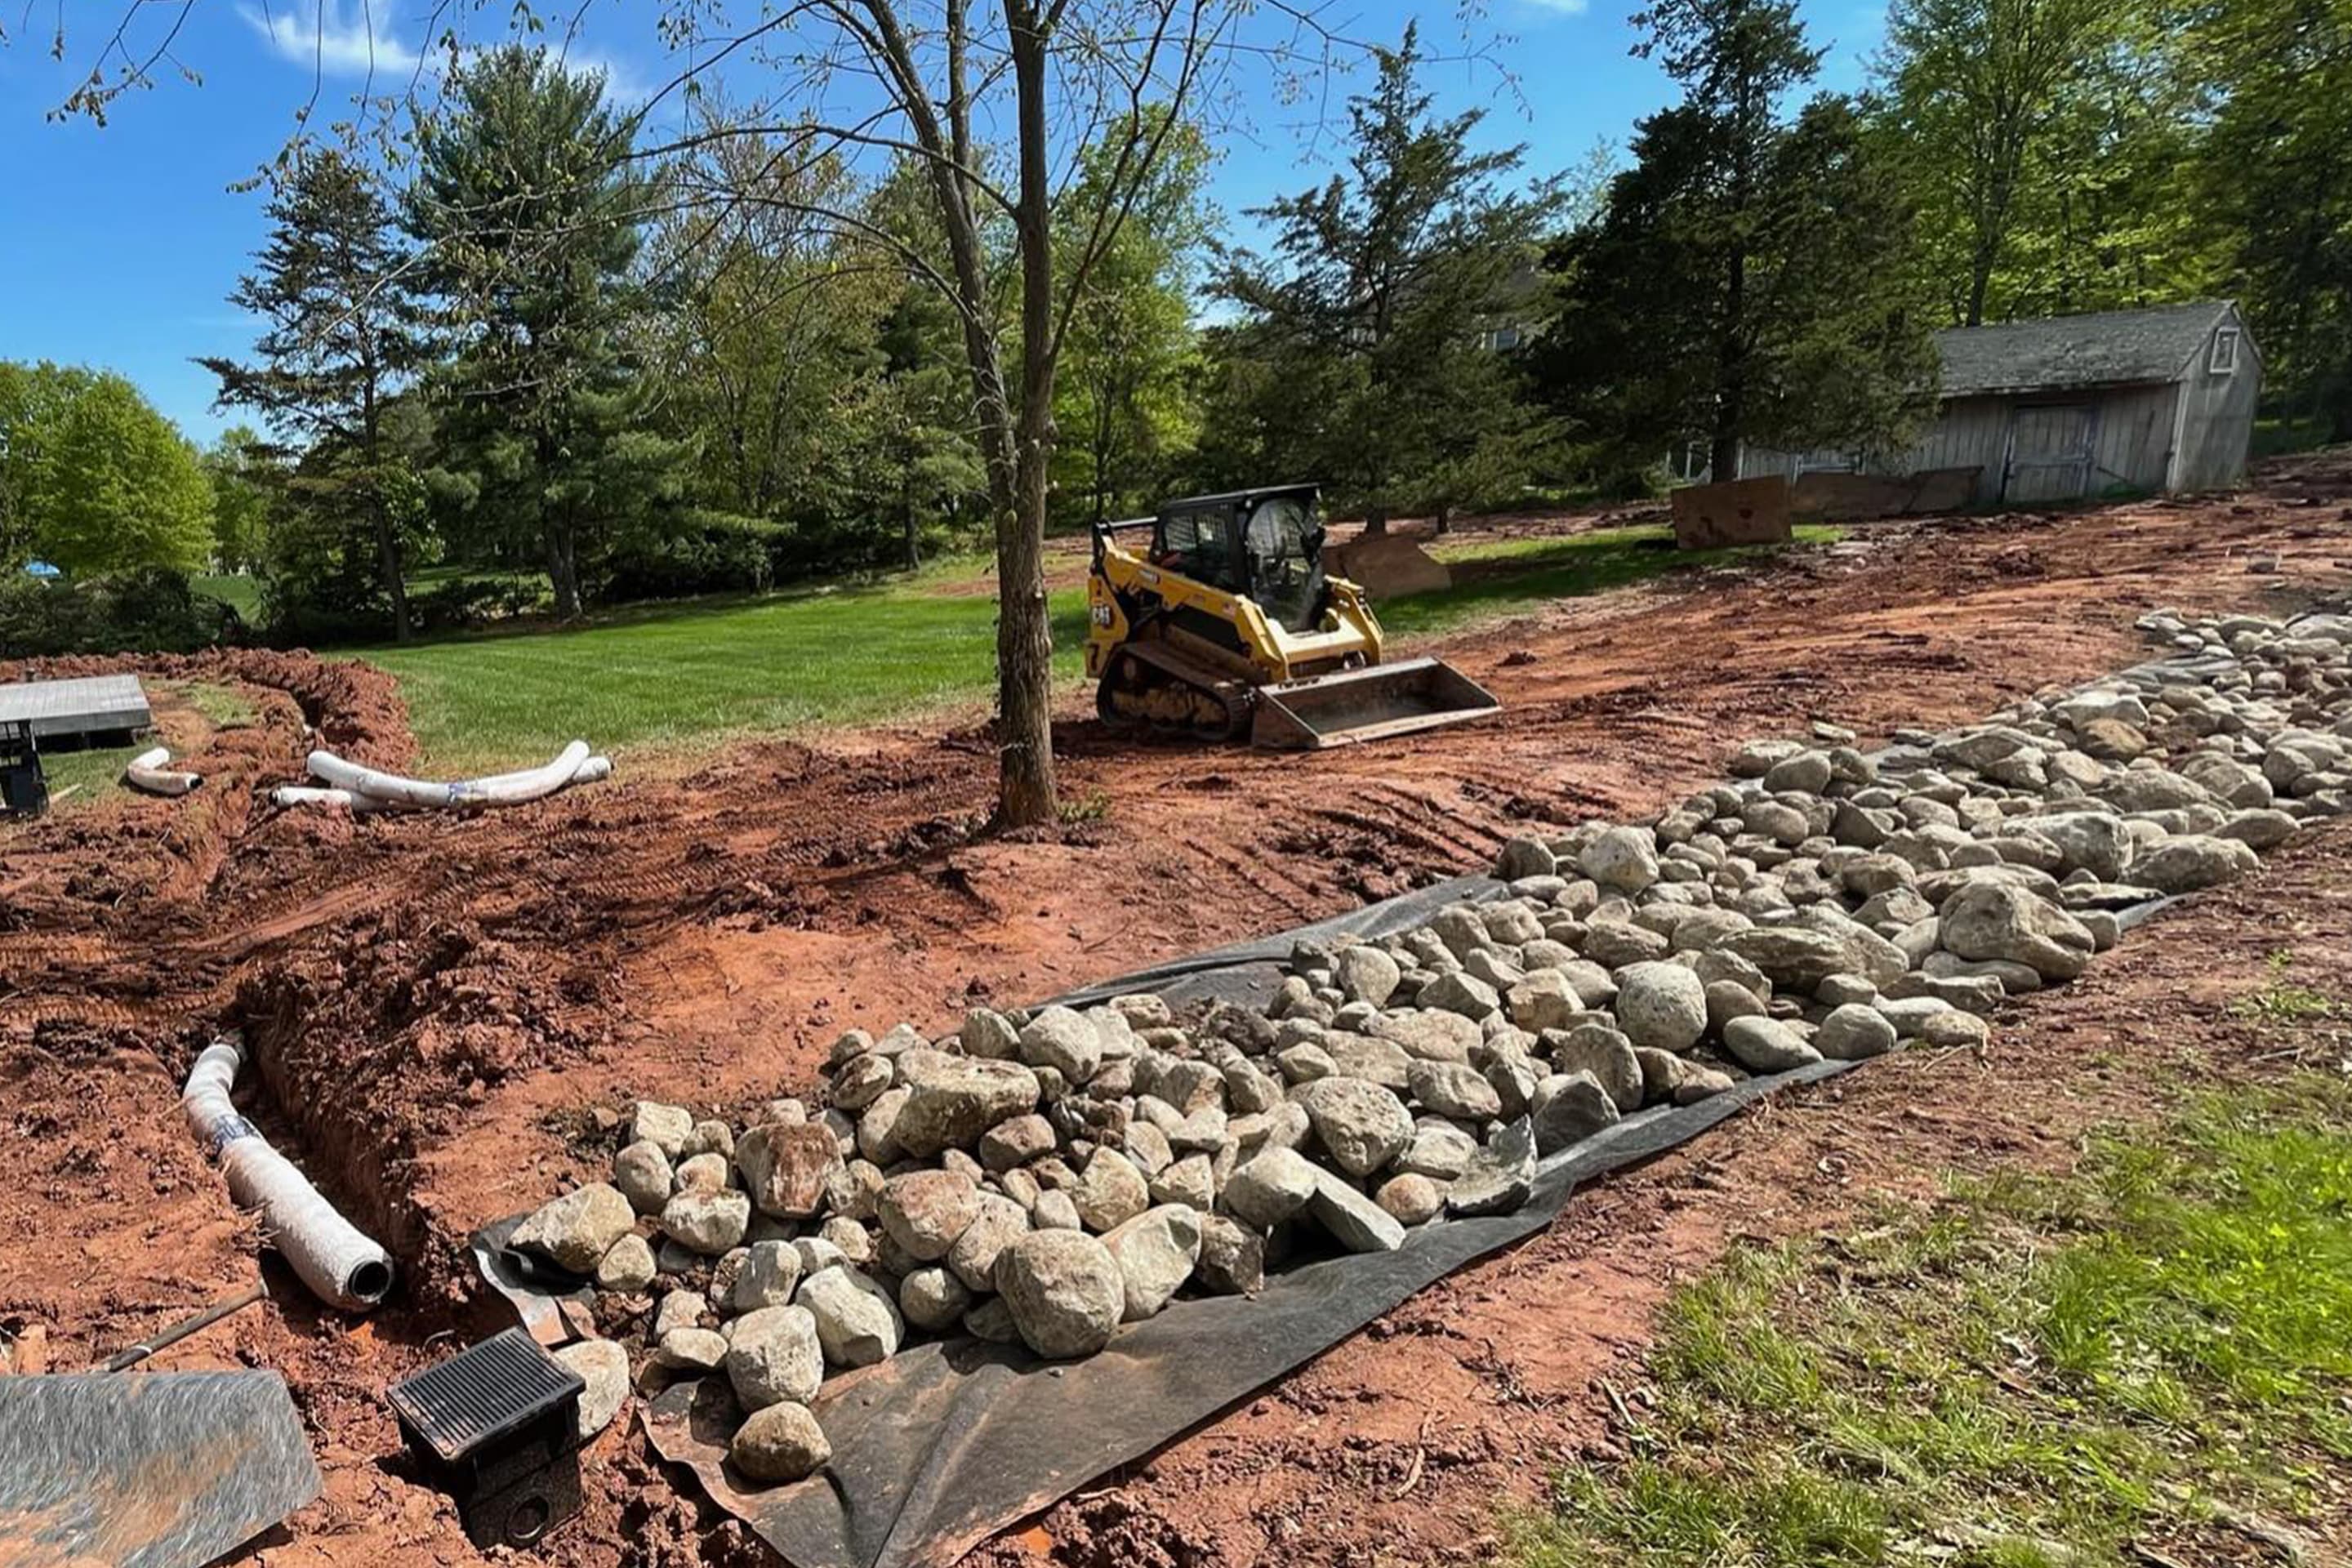 Vision Landscape Services excavates a ditch to install a drainage system of pipes and rocks to ensure proper water runoff.